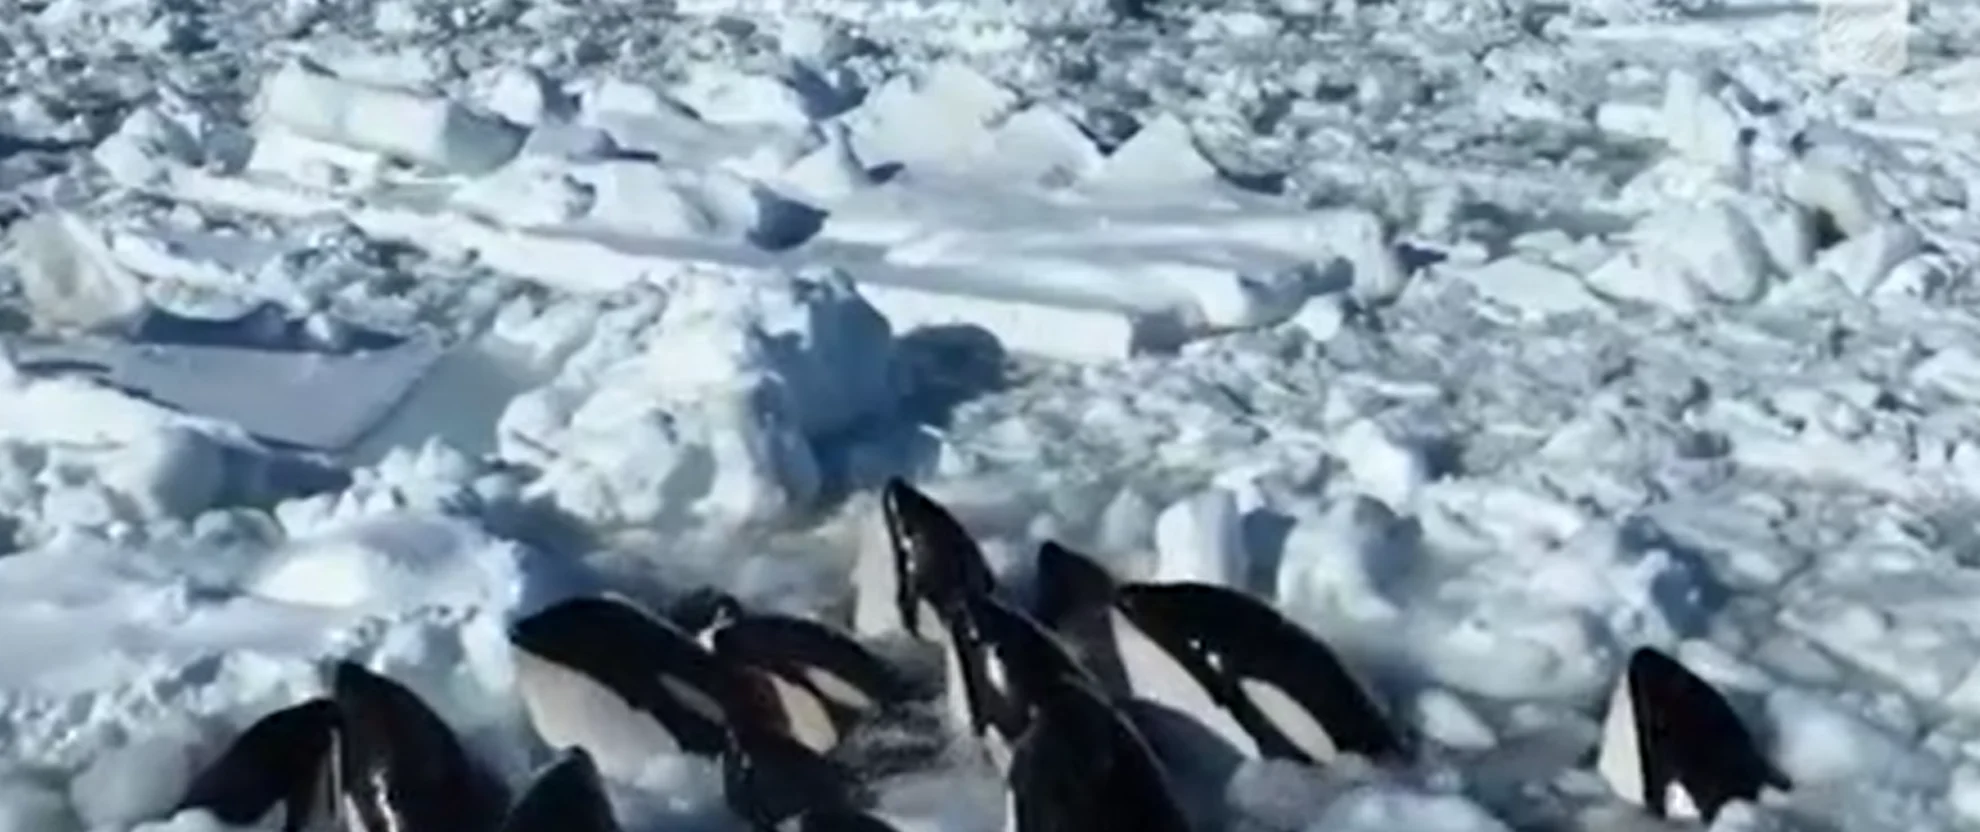 Pod of around 13 orcas trapped in ice appears to be free